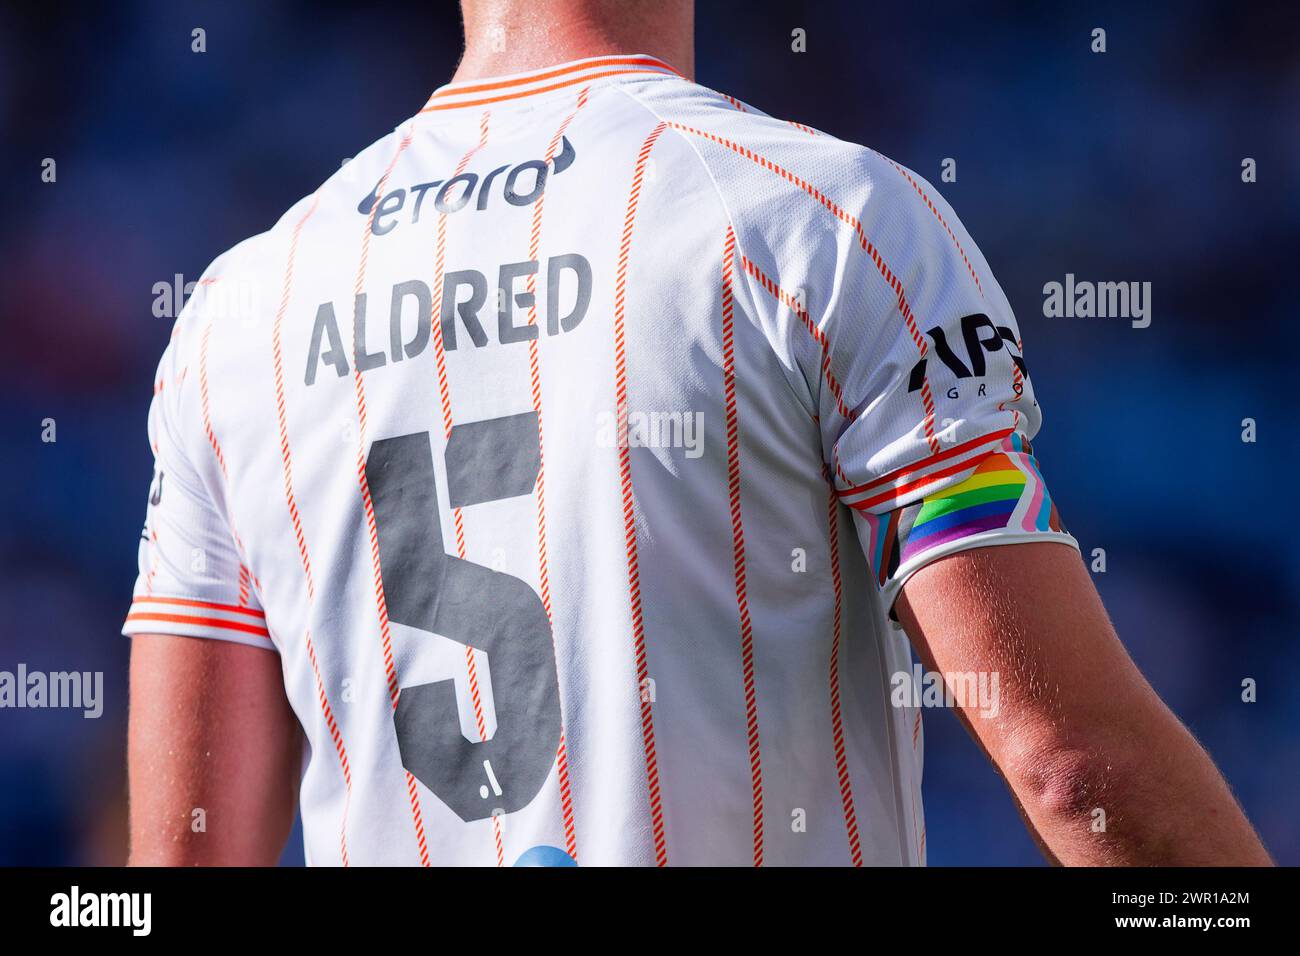 Sydney, Australia. 10th Mar, 2024. Tom Aldred of Brisbane Roar wears a captain's rainbow coloured arm band as part of pride week celebrations during the A-League match between Sydney and Brisbane at Allianz Stadium on Mar 10, 2024 in Sydney, Australia Credit: IOIO IMAGES/Alamy Live News Stock Photo